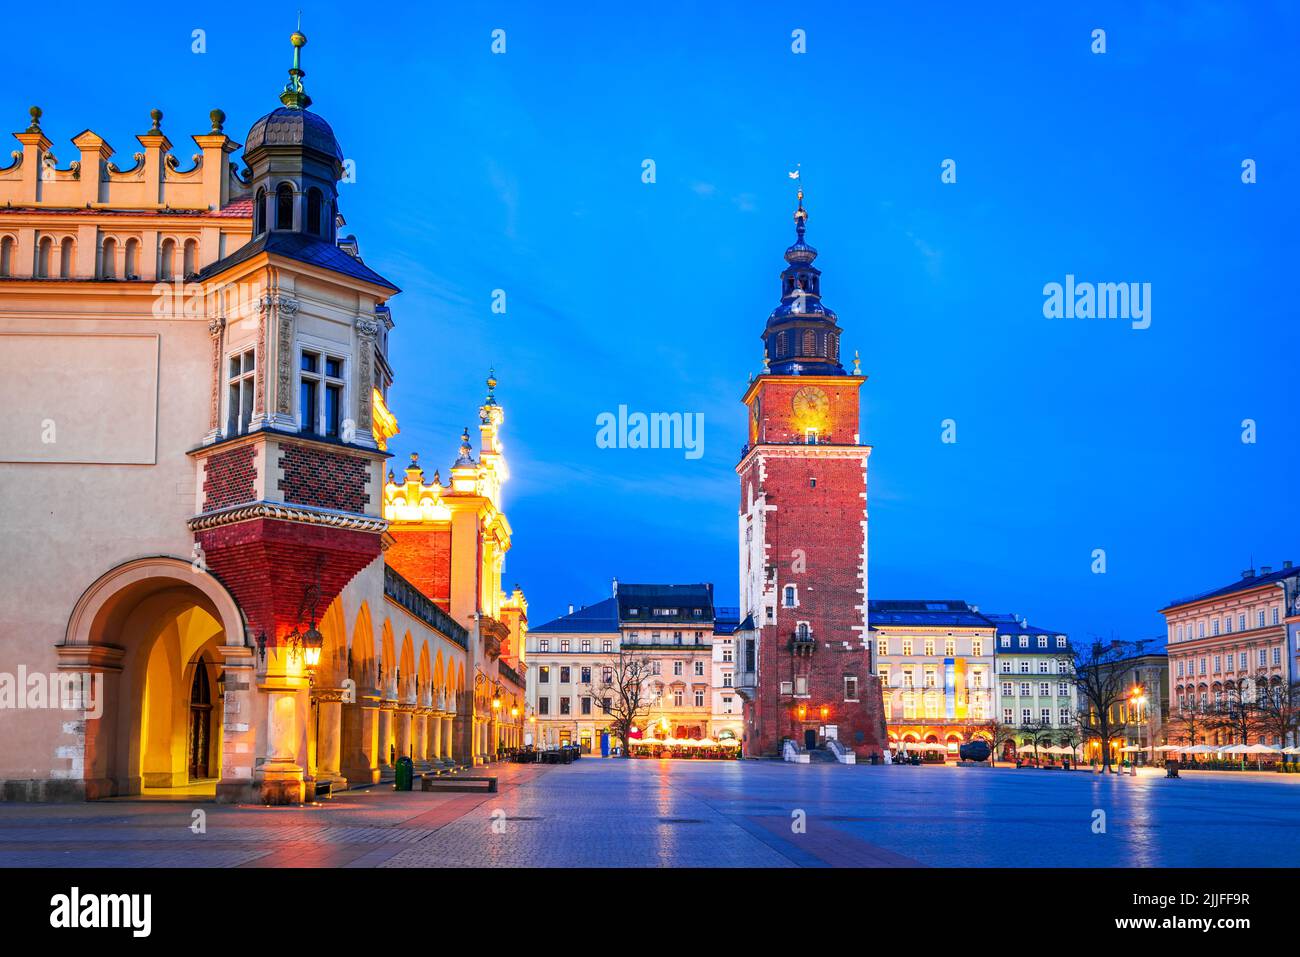 Krakow, Poland. Twilight scenic Ryenek Square, historical Cracovia with Cloth Hall and Town Hall Tower Stock Photo